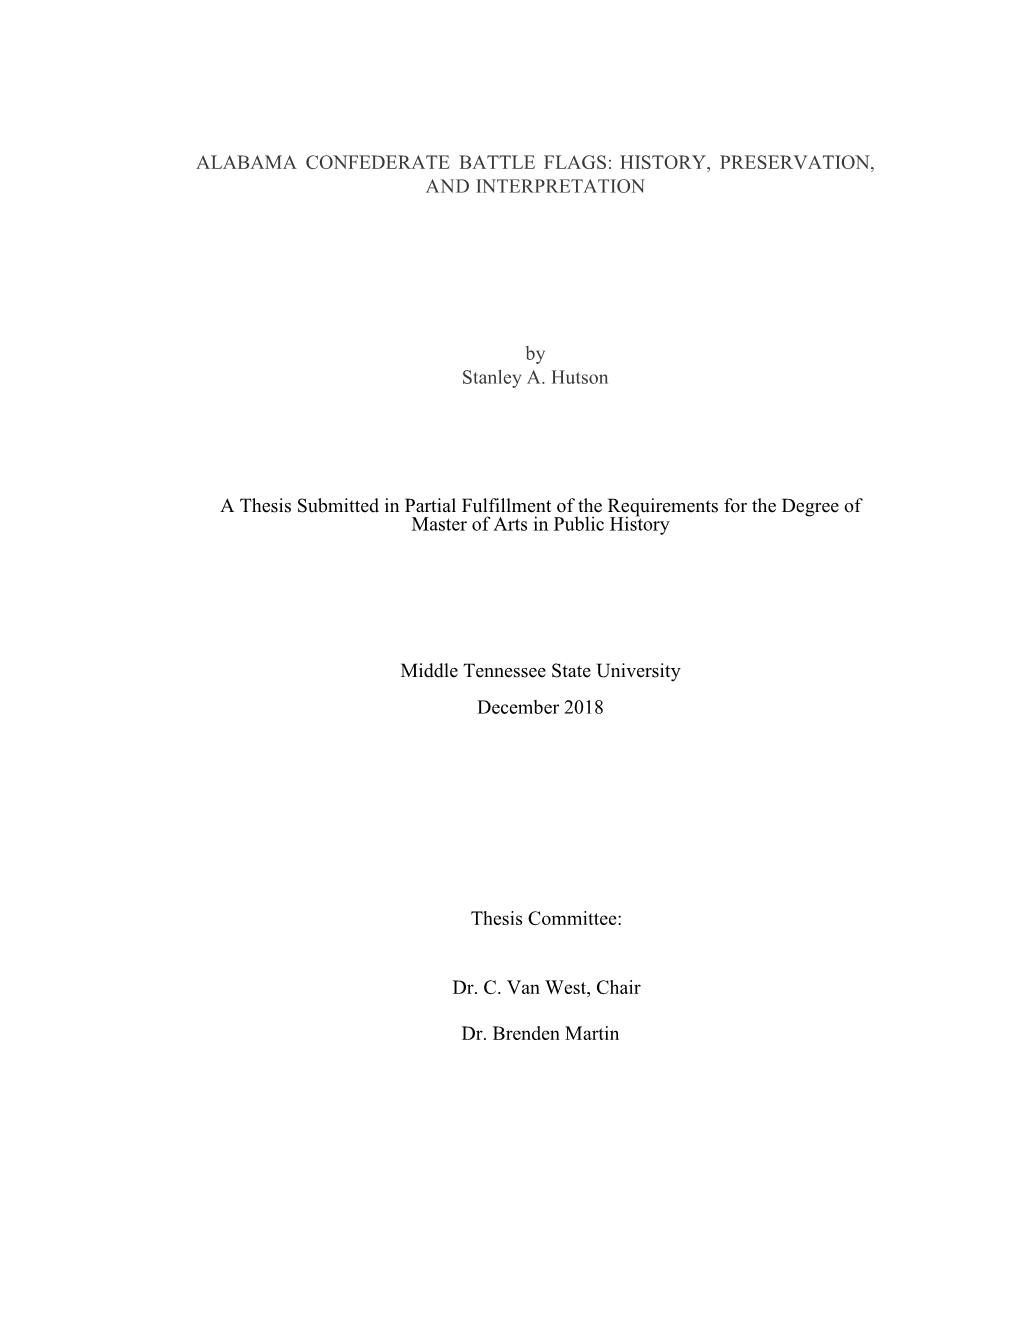 ALABAMA CONFEDERATE BATTLE FLAGS: HISTORY, PRESERVATION, and INTERPRETATION by Stanley A. Hutson a Thesis Submitted in Partial F